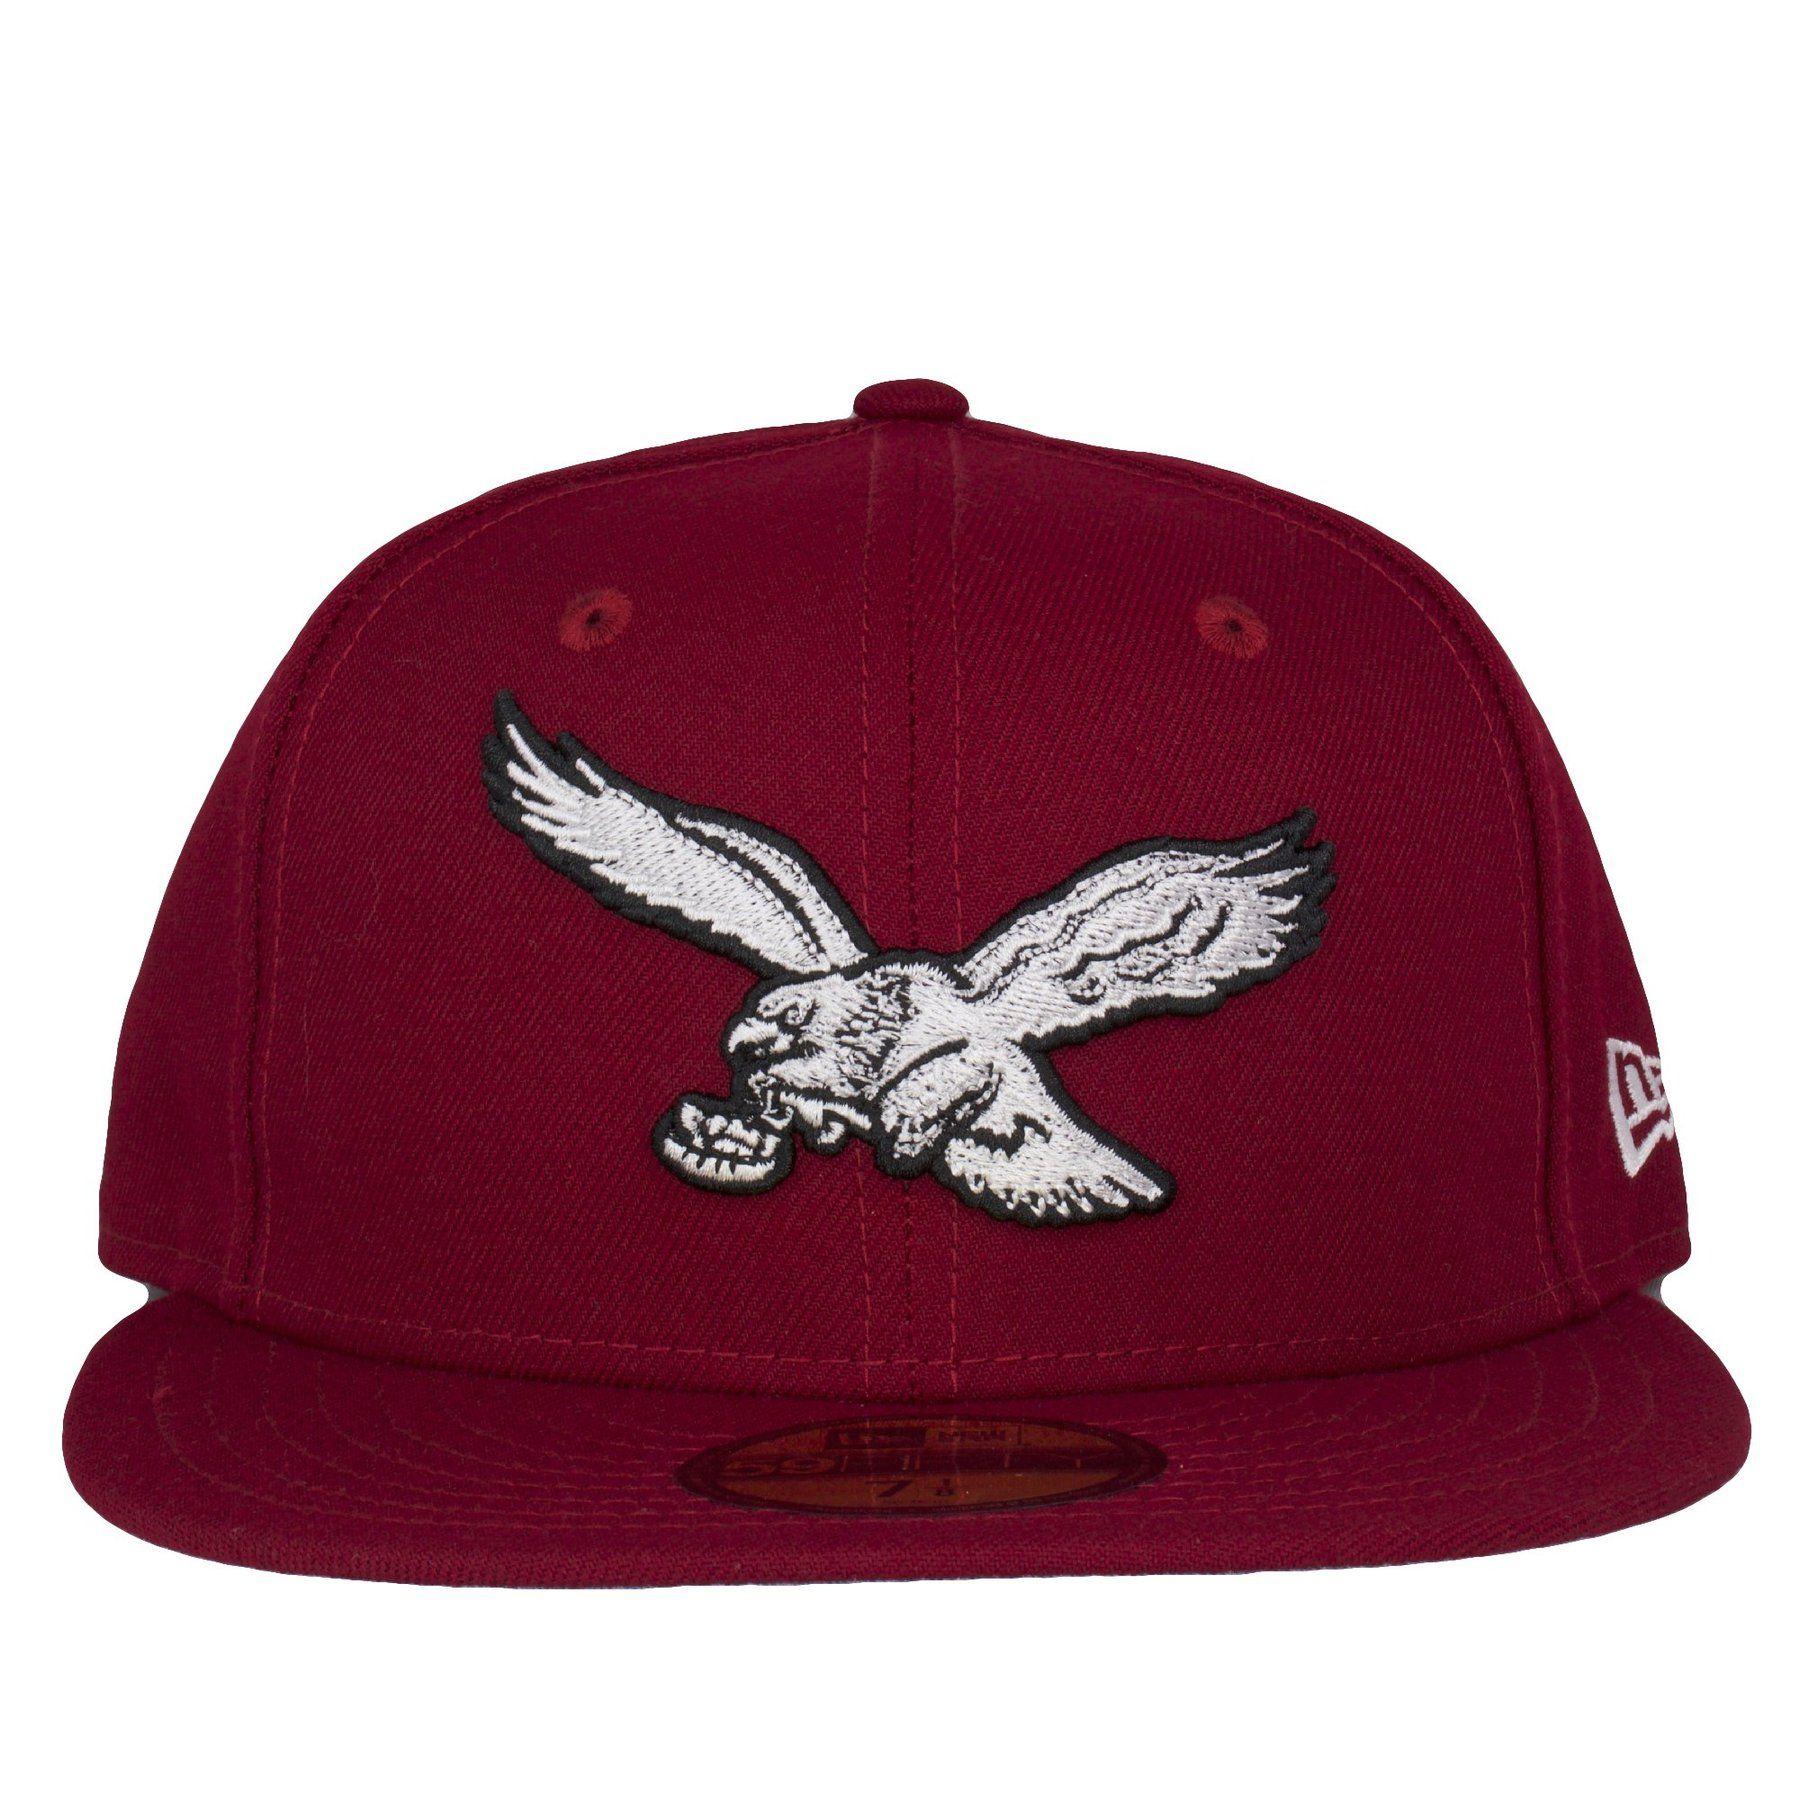 Black and Red Eagles Logo - Philadelphia Eagles Throwback Logo Cooperstown Phillies Maroon ...